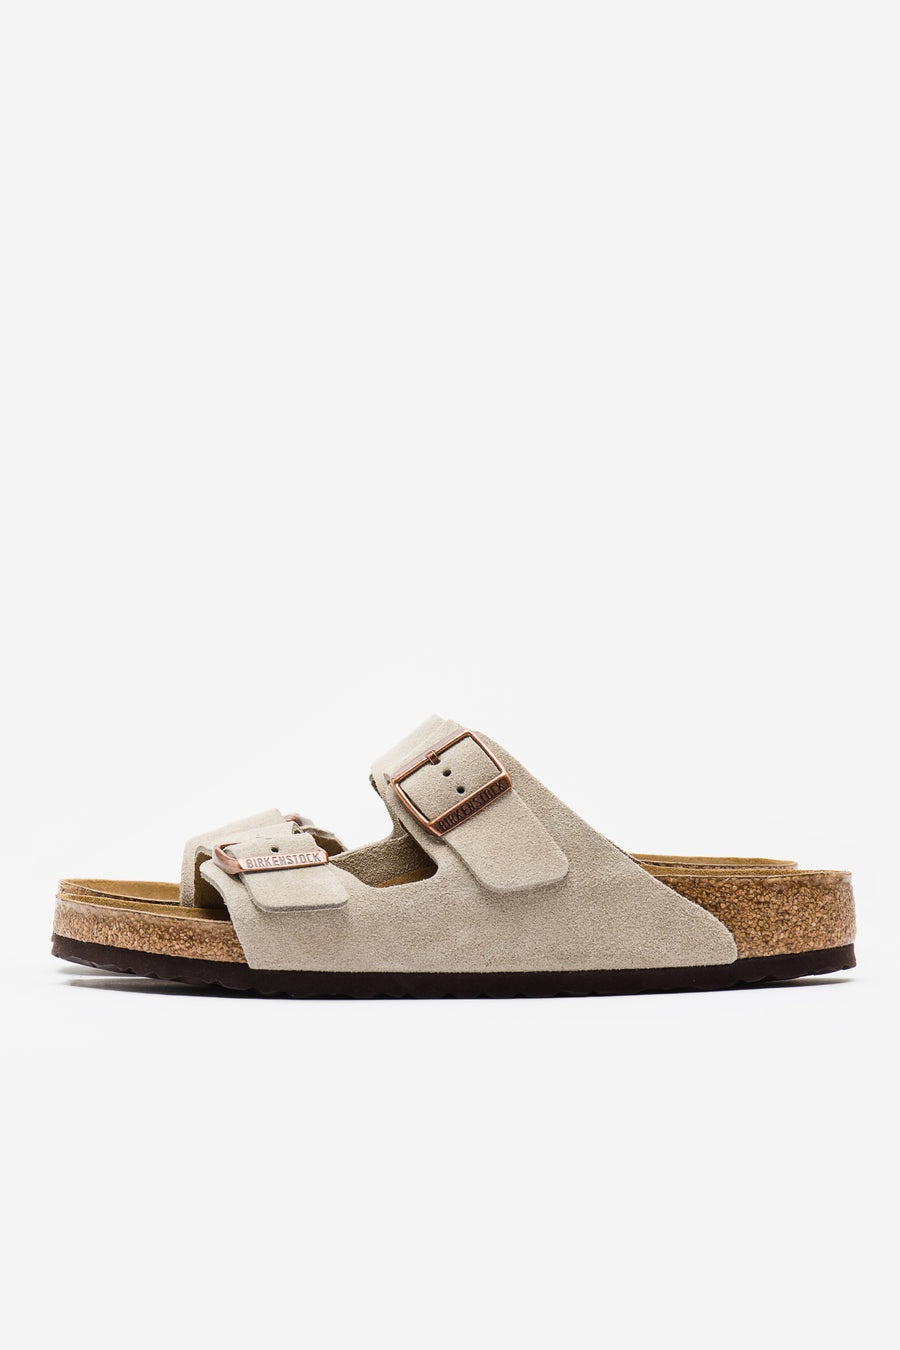 Arizona Soft Footbed Sandal in Taupe - 3